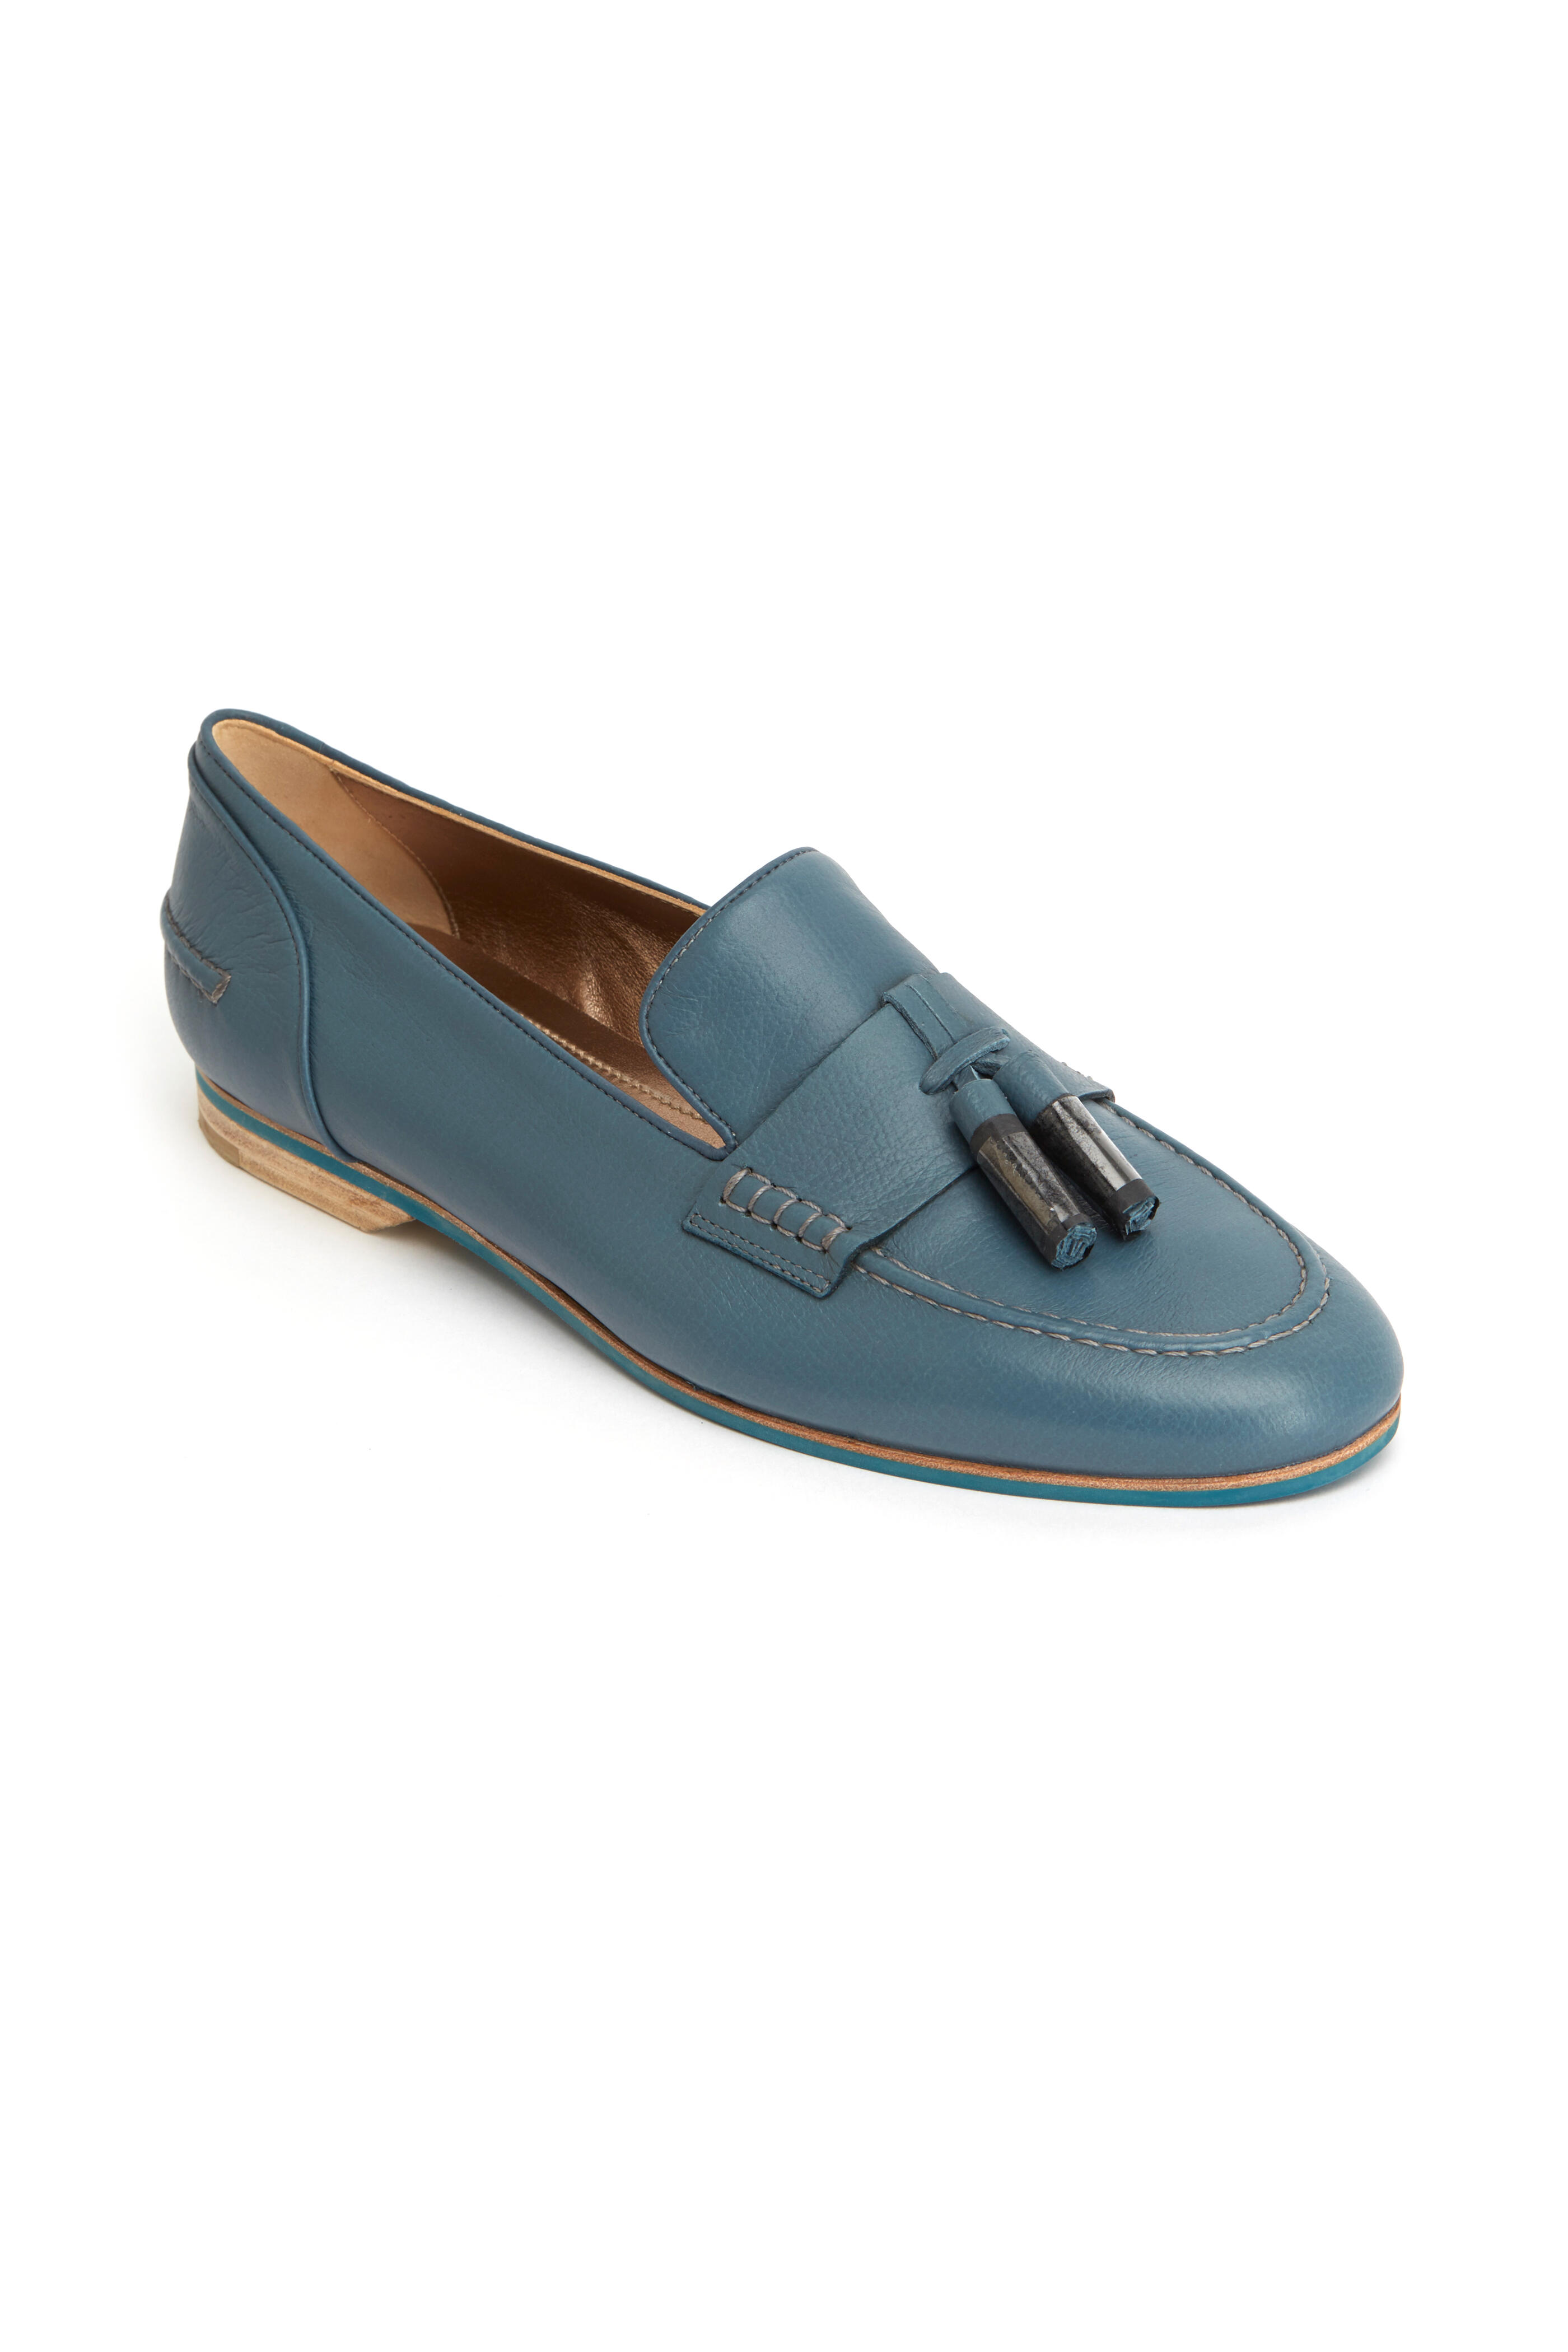 Lanvin - Blue Leather Tassel Loafers | Stores